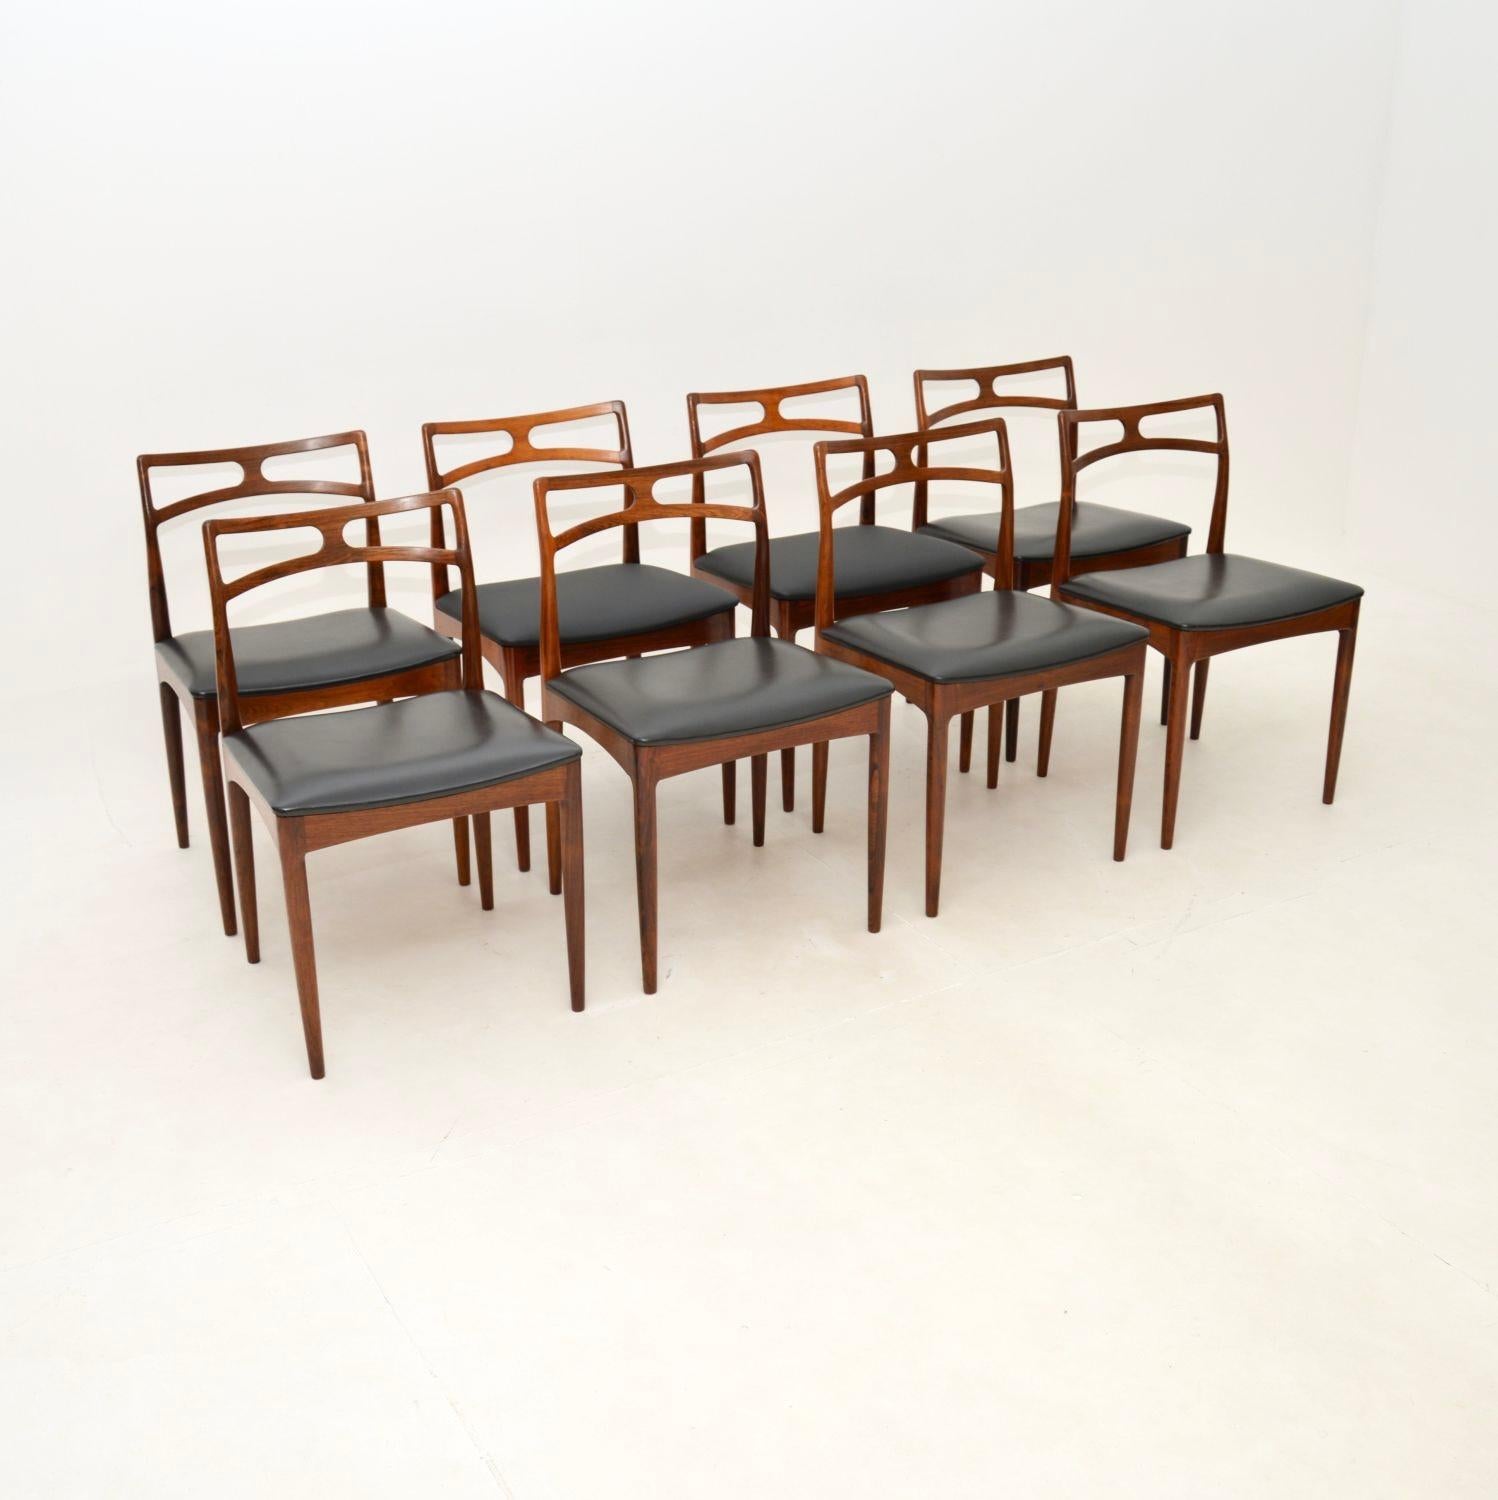 A stunning set of eight vintage model 94 dining chairs, designed by Johannes Andersen for Christian Linneberg. These were made in Denmark, they date from the 1960’s.

The quality is superb, these have a stylish and very elegant design. They are